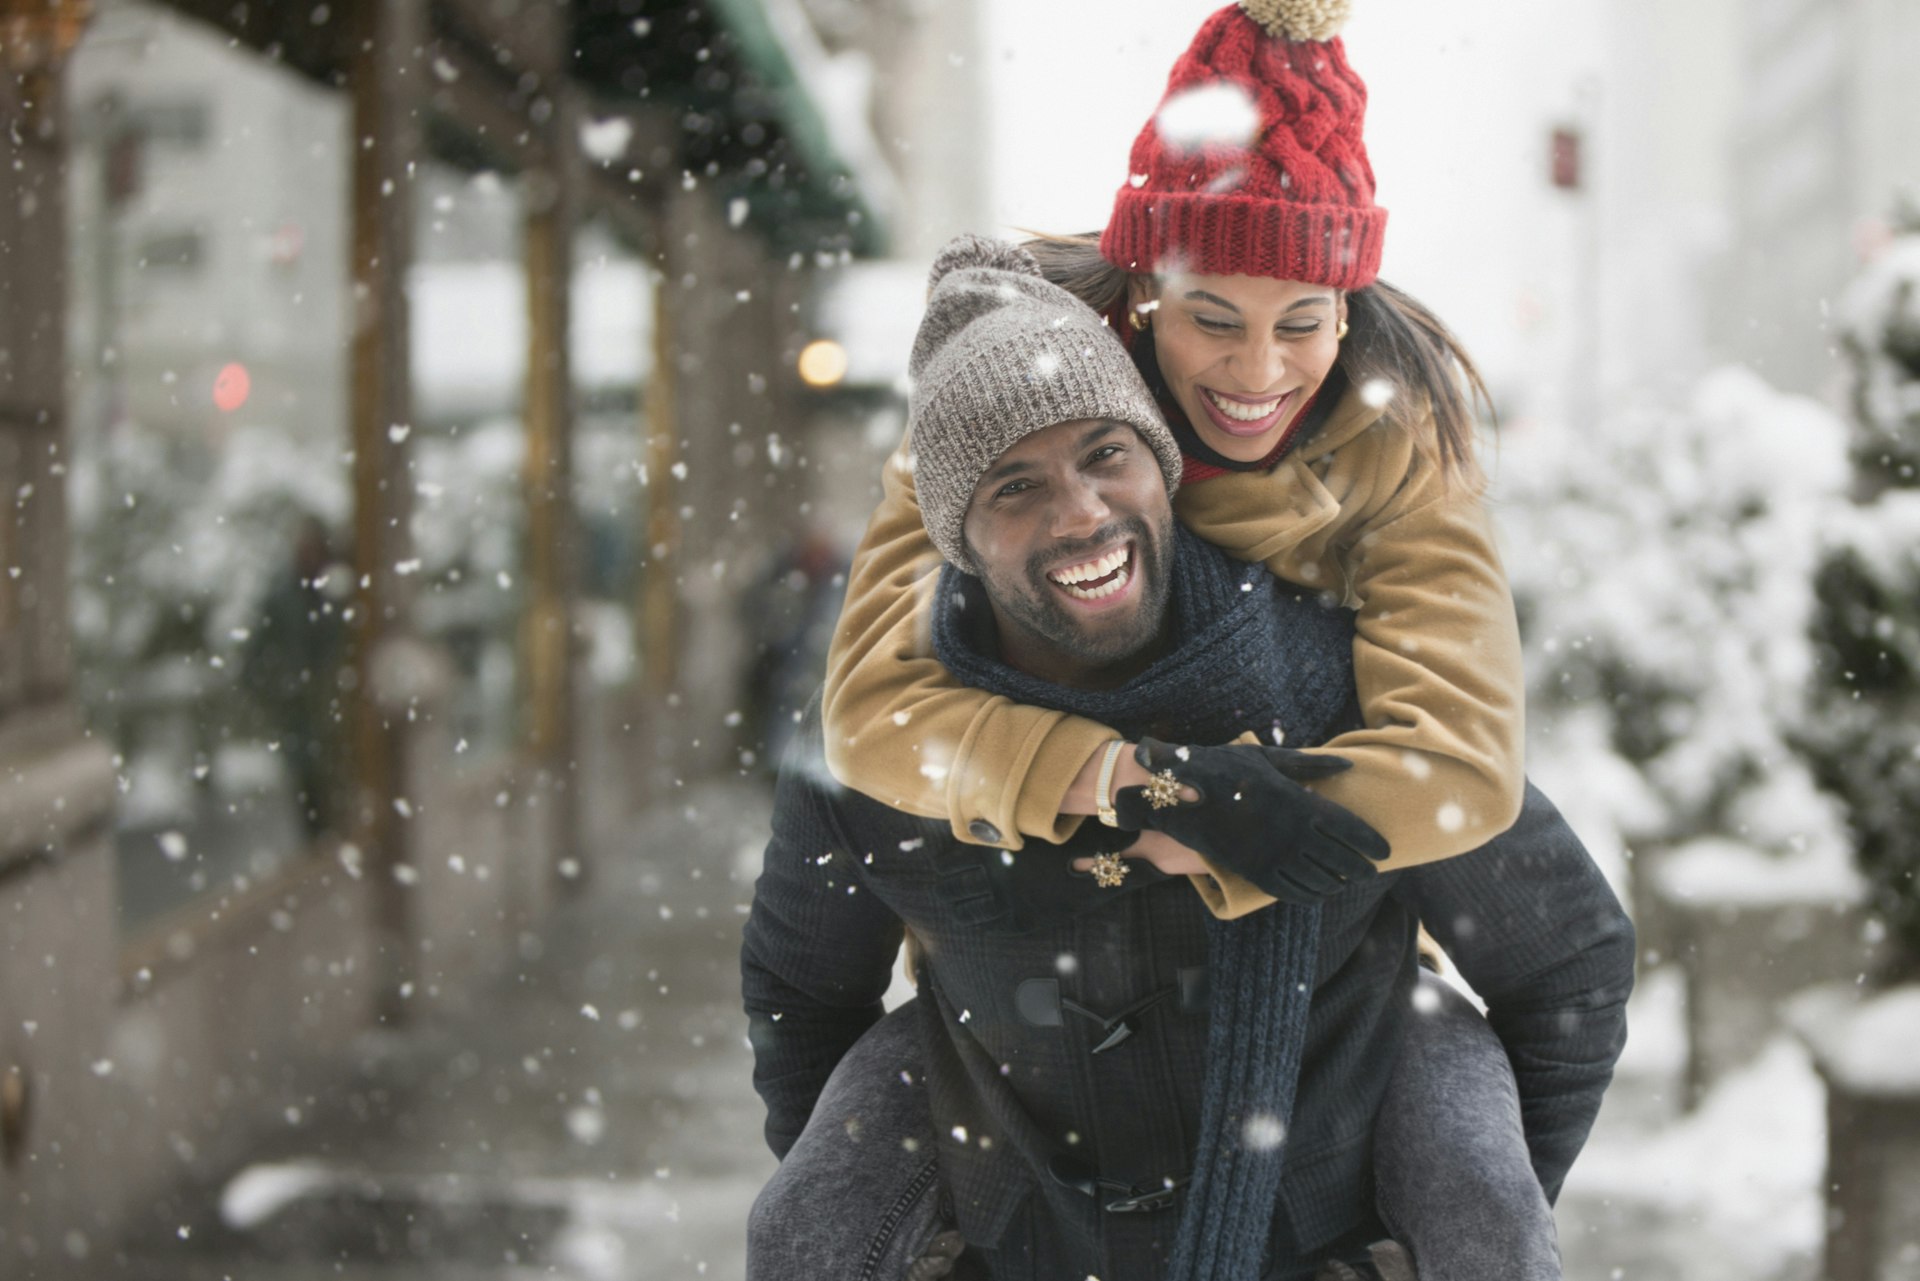 A smiling man gives a smiling woman a piggy back in New York City with as snow fallas around them 